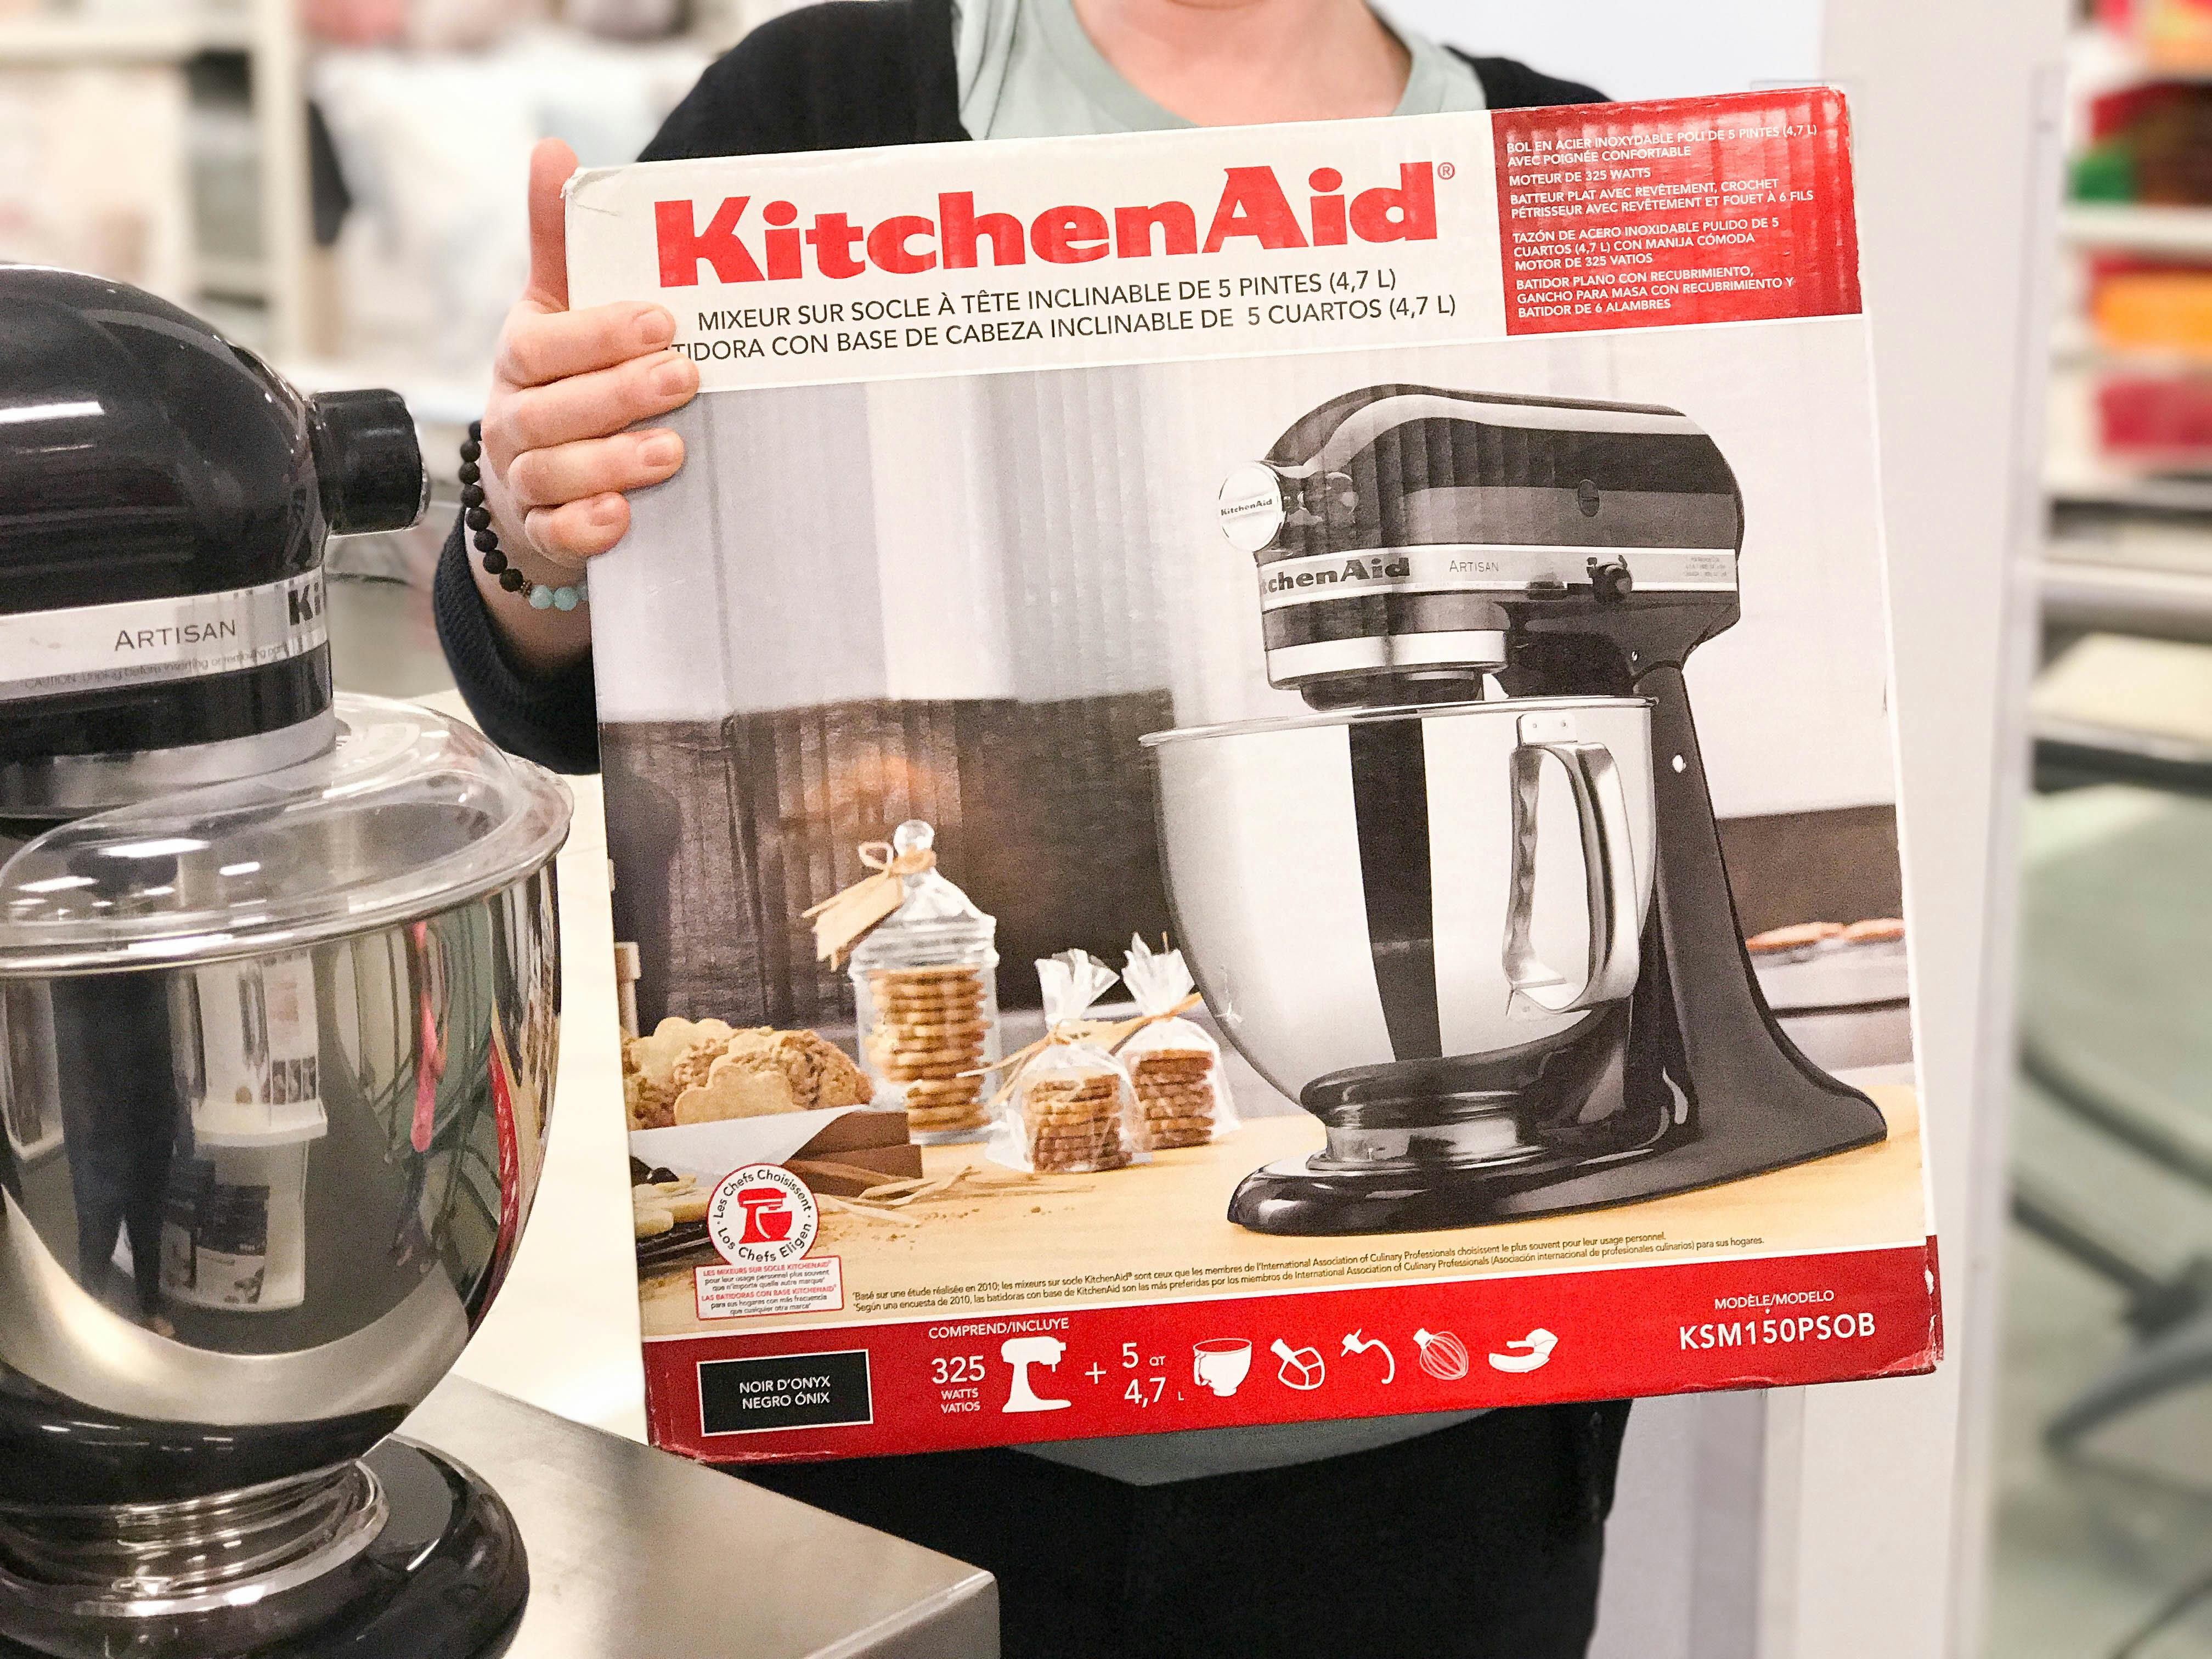 20 Foolproof Ways to Get a KitchenAid Mixer for Half Price   The ...